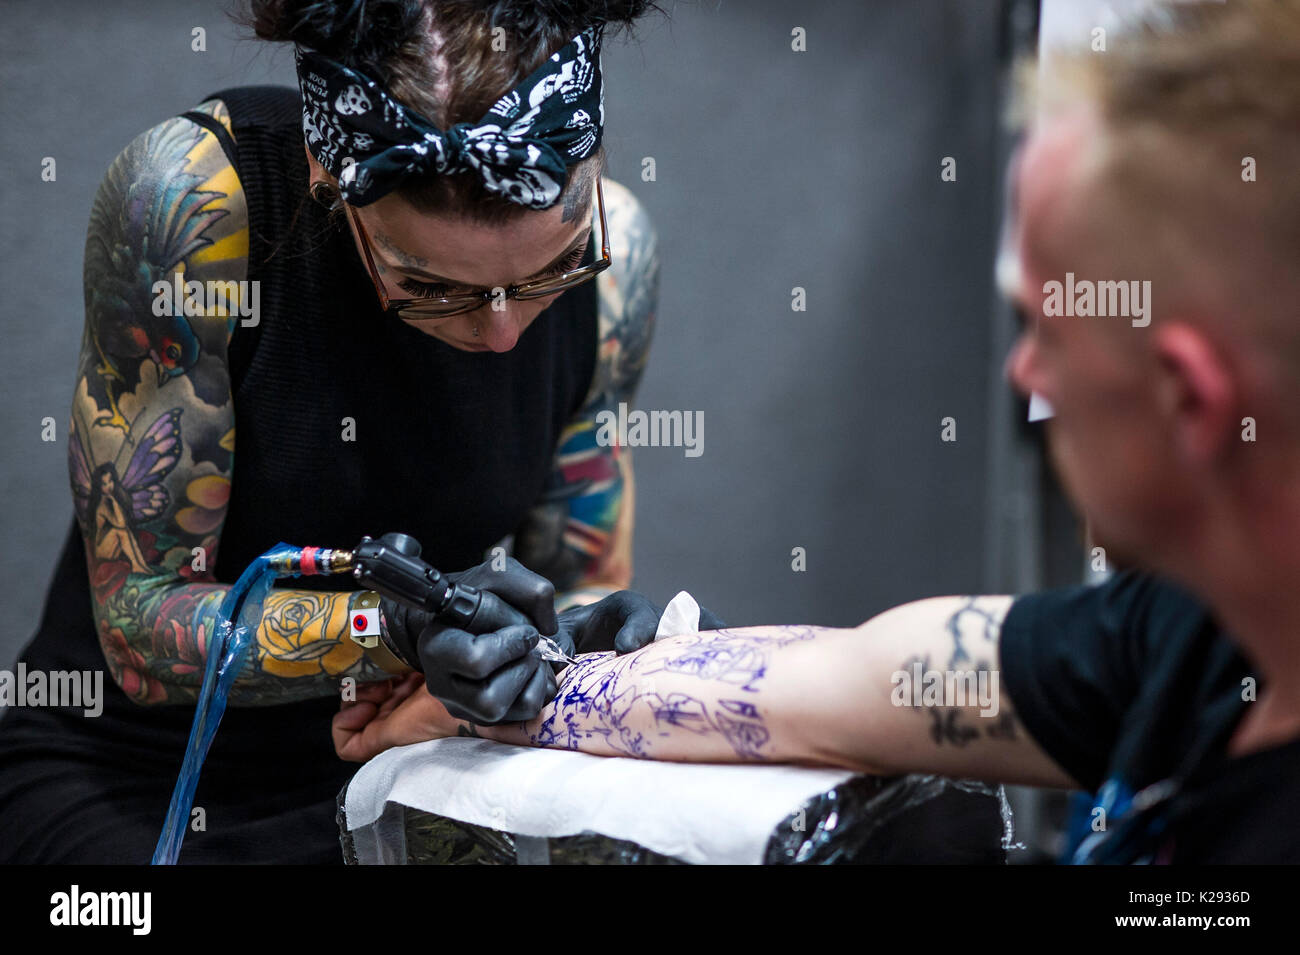 Tattooing. A female tattooist applying a tattoo to the forearm of a customer at the Cornwall tattoo Convention. Stock Photo